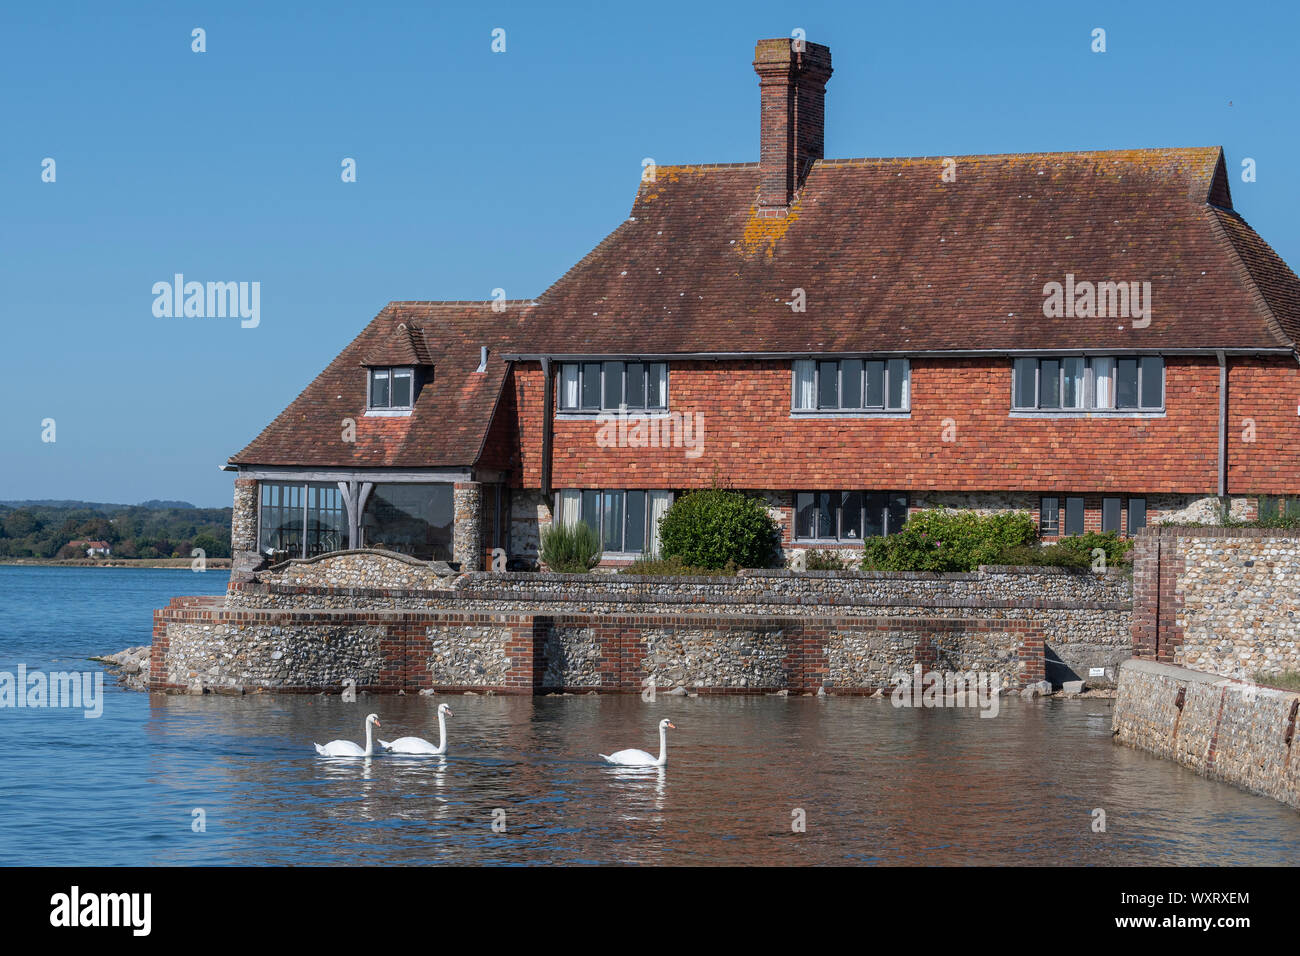 Typical West Sussex house on the edge of the water in the picturesque  harbour village of Bosham, Chichester Harbour, West Sussex, England, UK Stock Photo